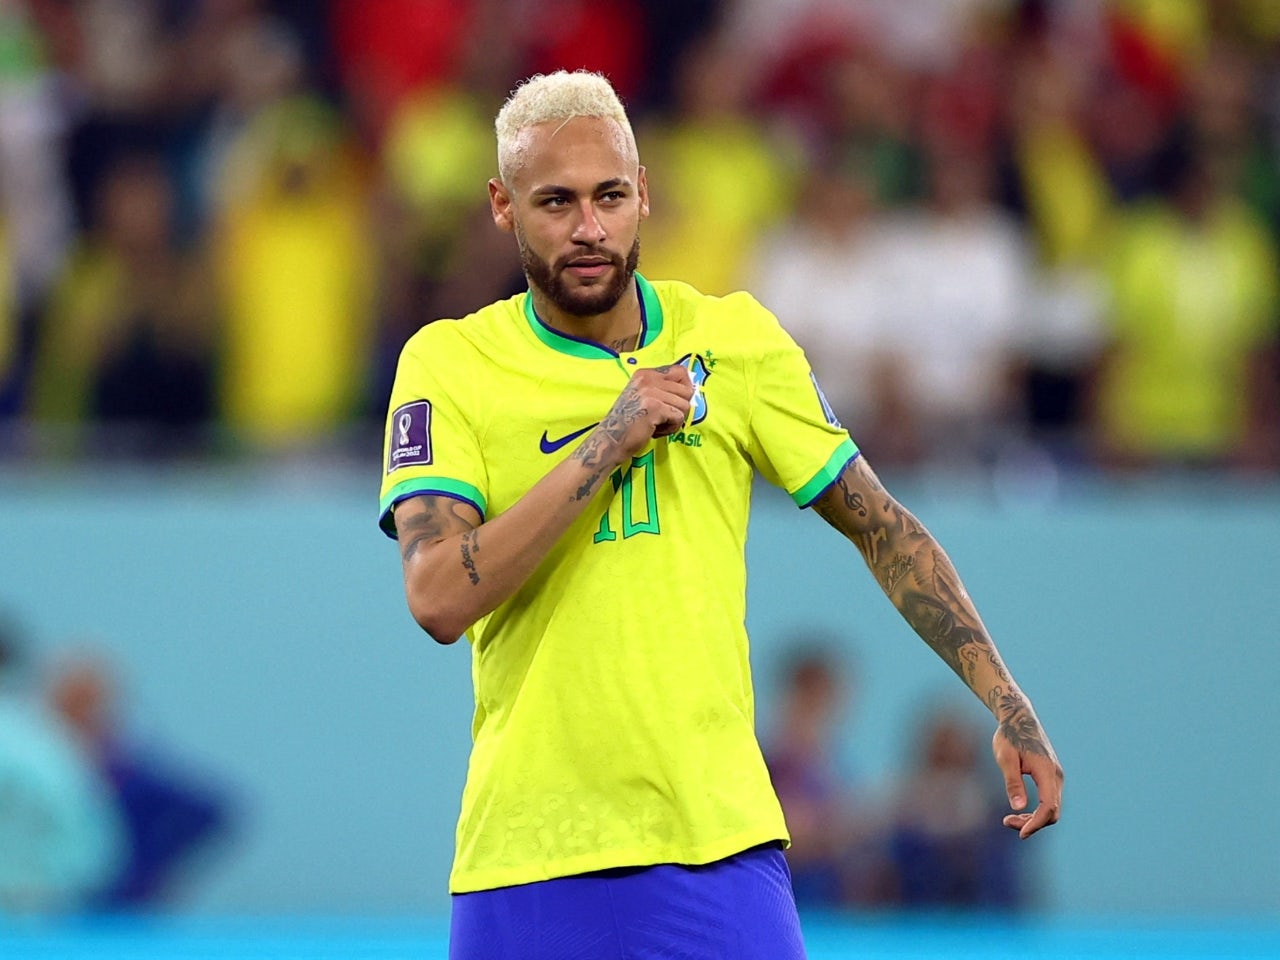 Manchester United 'not in talks to sign Neymar'